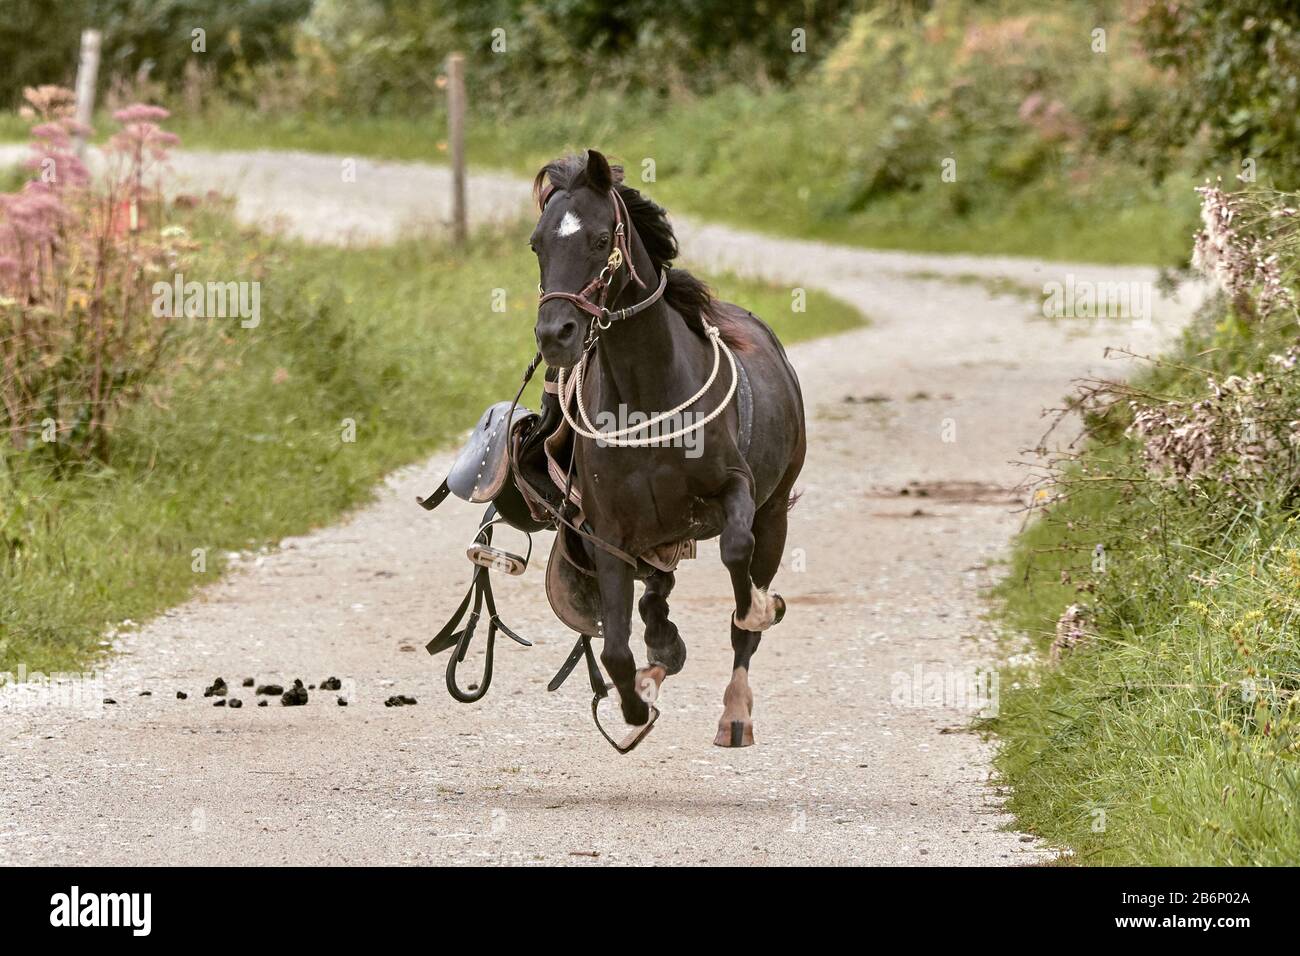 Escaped horse running towards camera on a dirt road Stock Photo